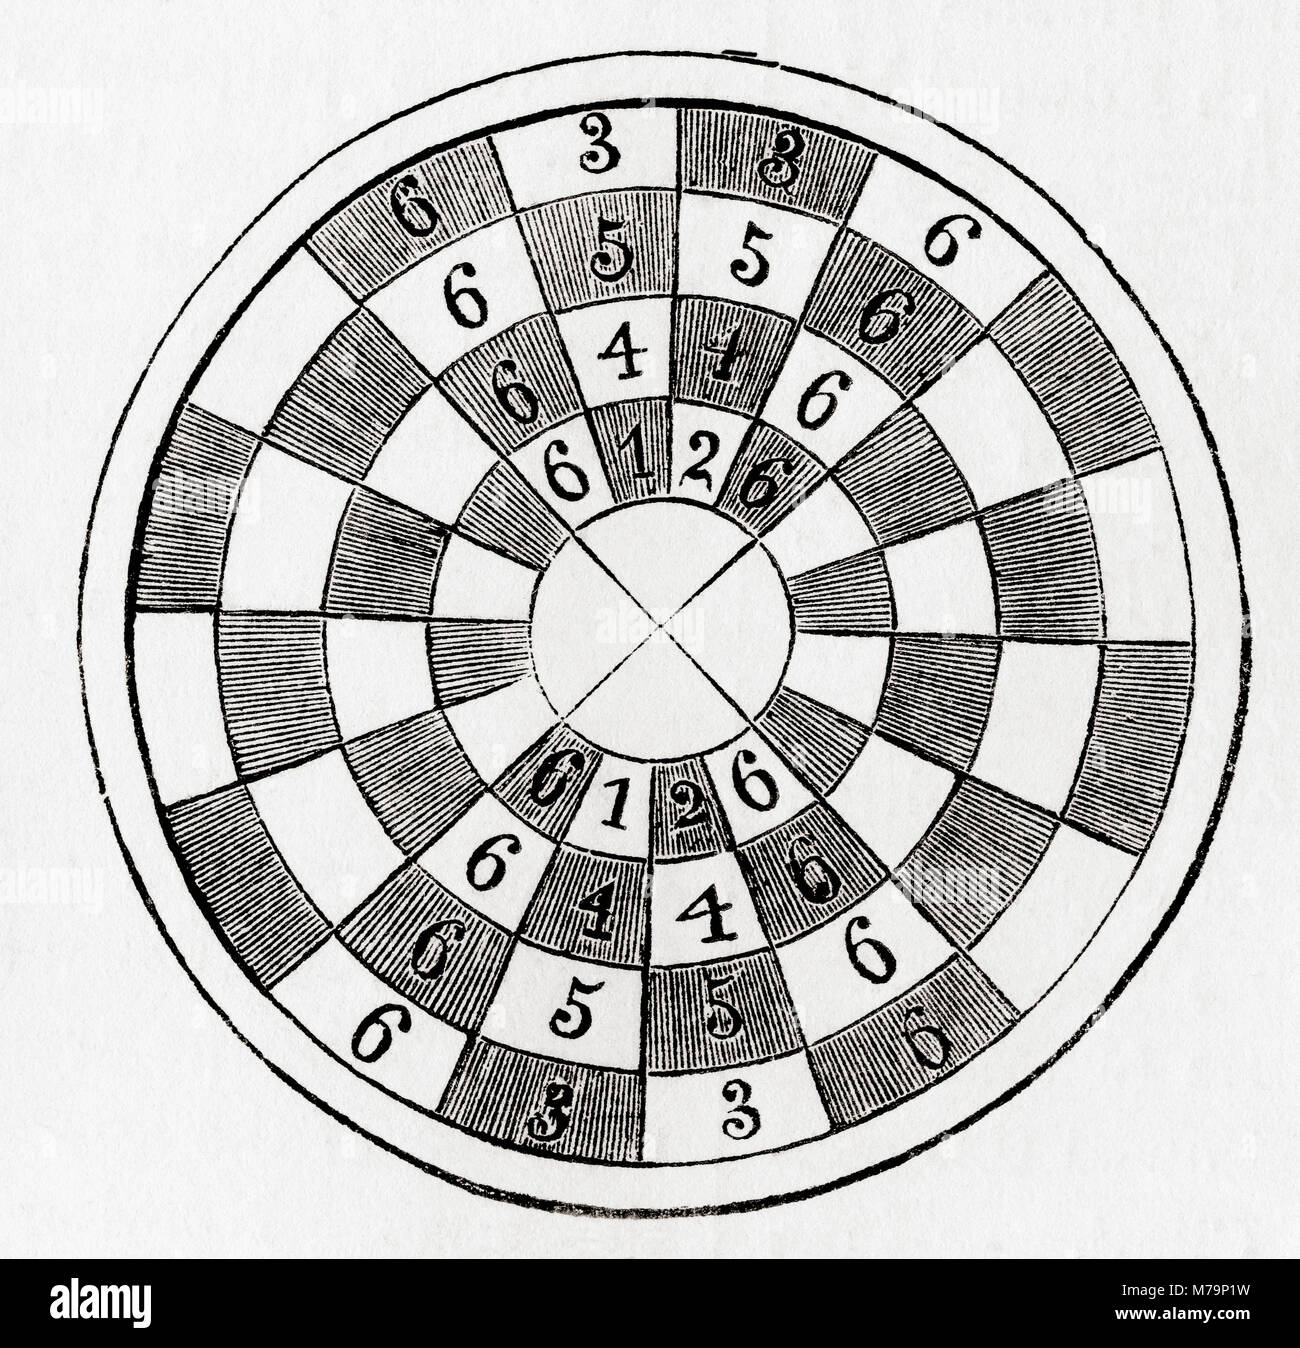 A circular chess board from the Middle Ages.  From Old England: A Pictorial Museum, published 1847. Stock Photo